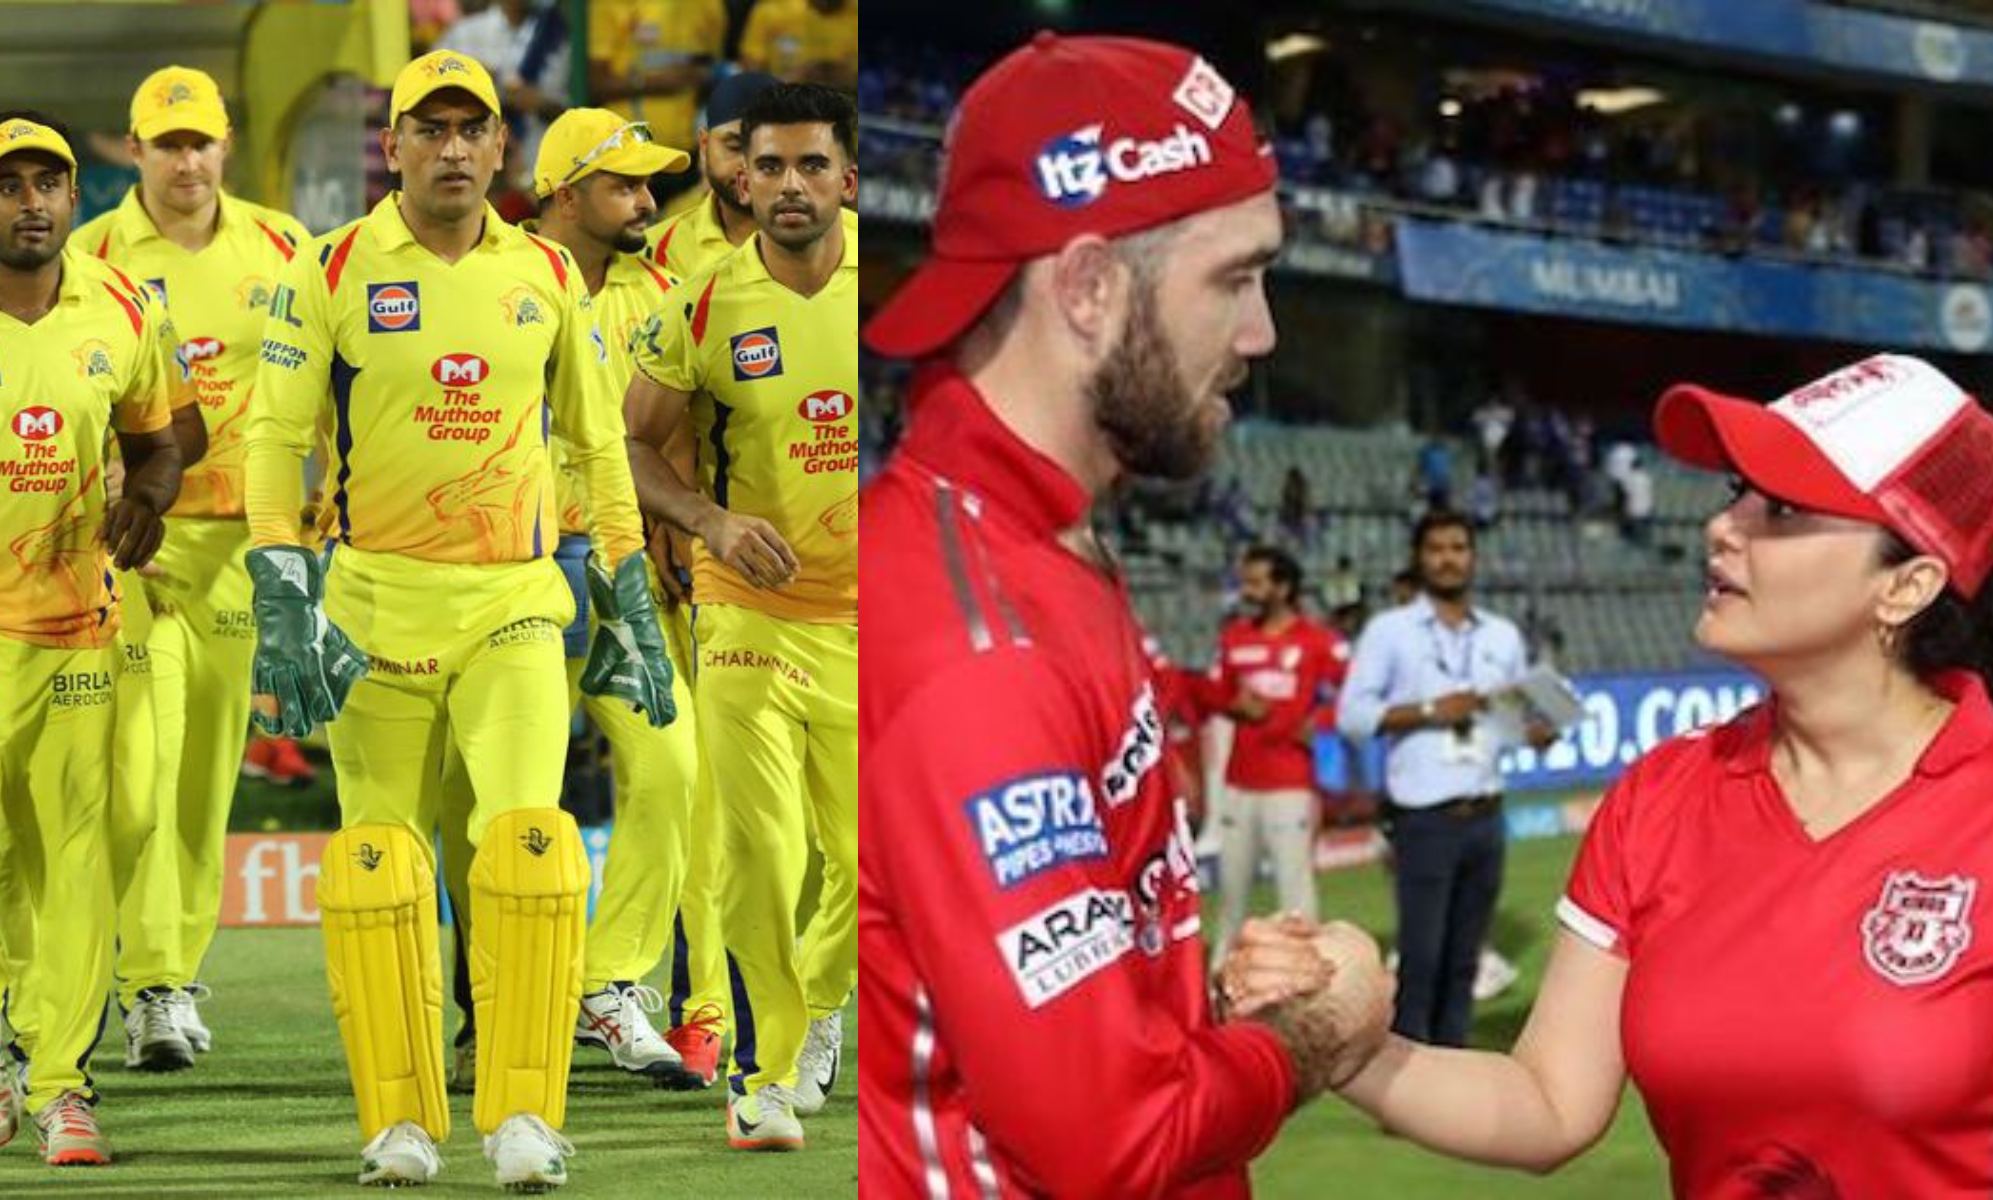 Chopra also named CSK and KXIP as other two favorites